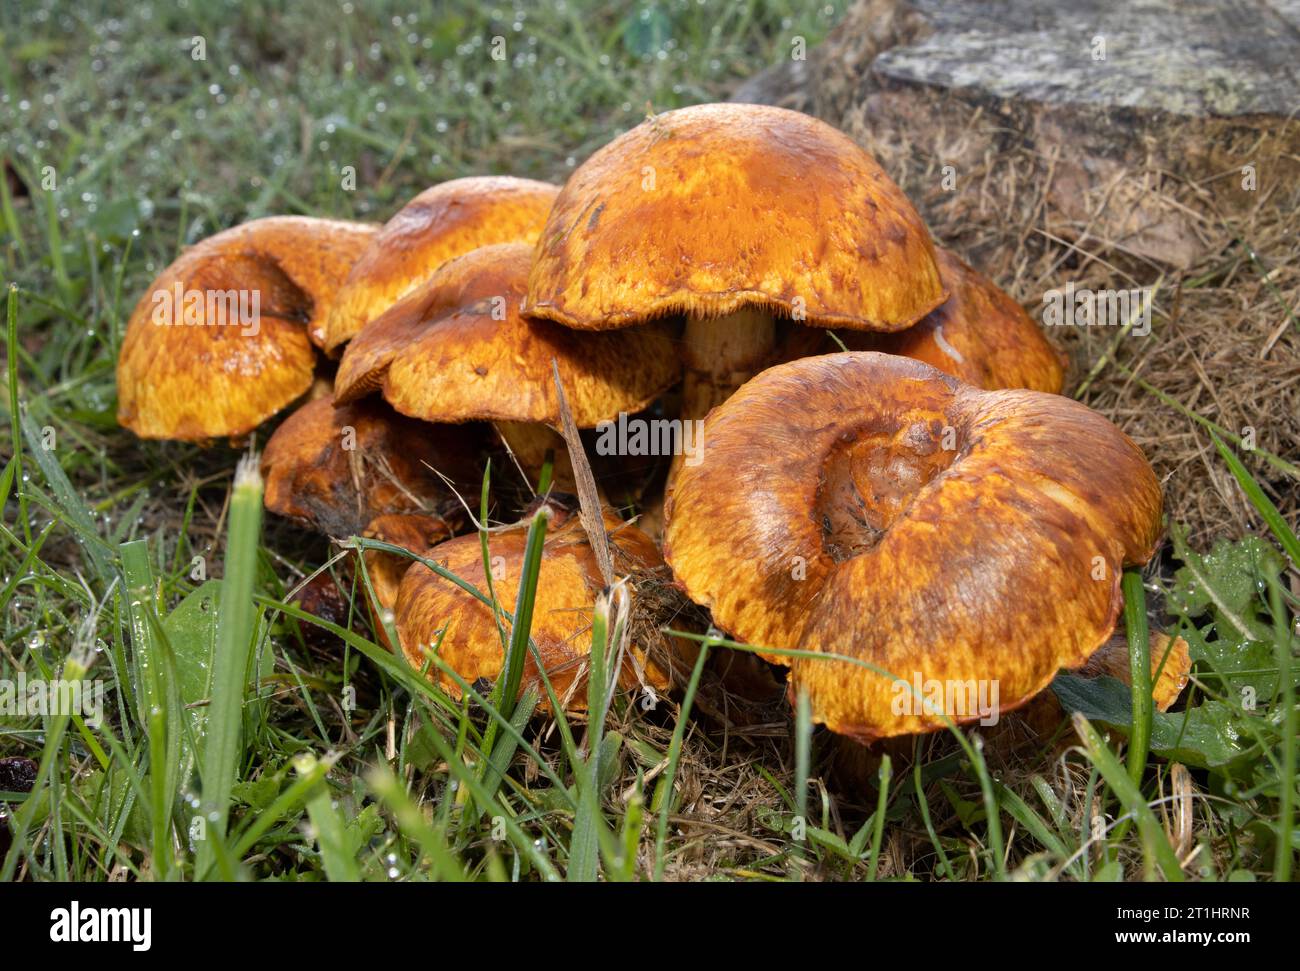 A common and conspicuous fungus often found on deadwood and rotting stumps. The Sulphur Tuft or Clustered Woodlover is toxic and can cause vomiting. Stock Photo